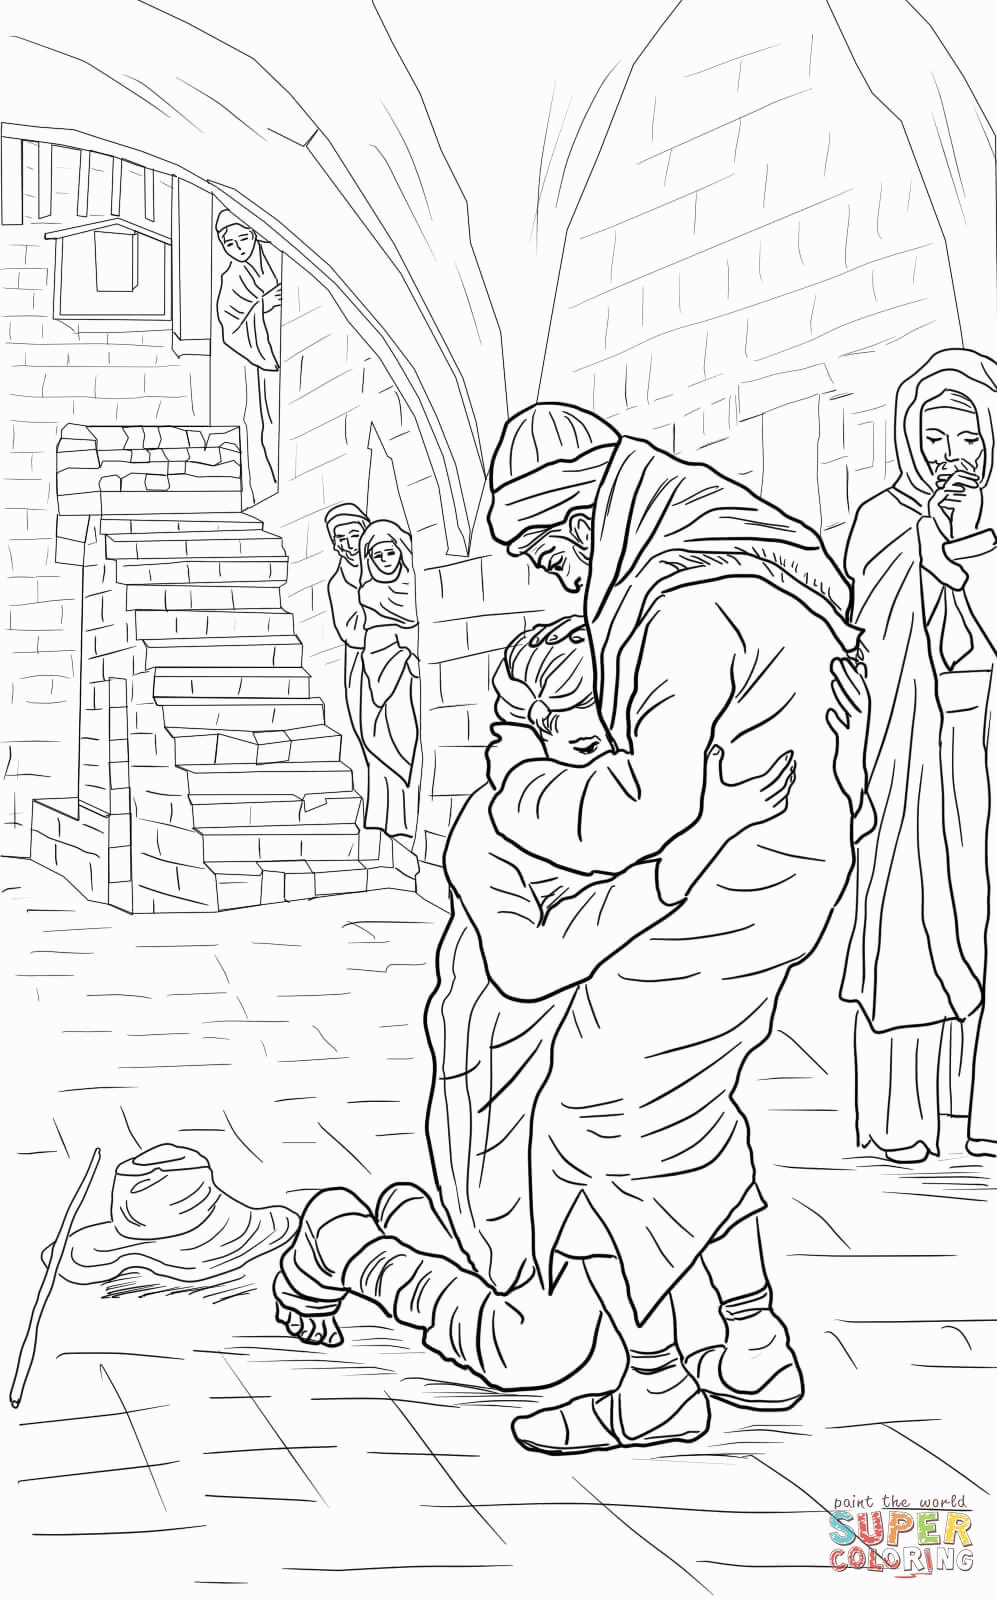 Prodigal Son Coloring Pages Preschool - Coloring Home